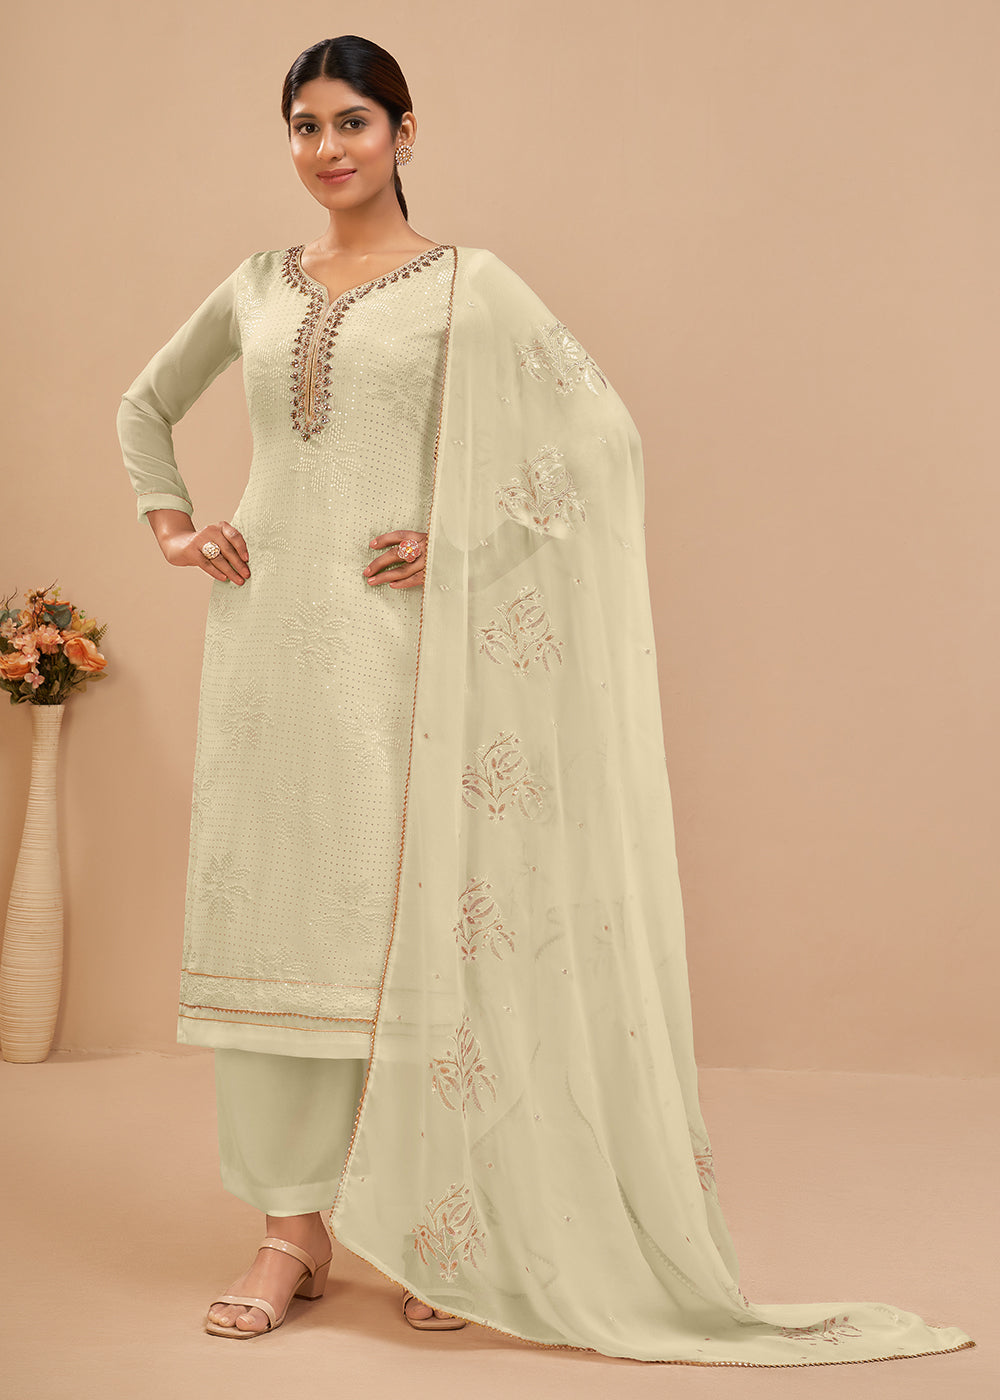 Buy Now Attractive Off White Sequins & Khatli Work Festive Palazzo Salwar Suit Online in USA, UK, Canada, Germany, Australia & Worldwide at Empress Clothing. 